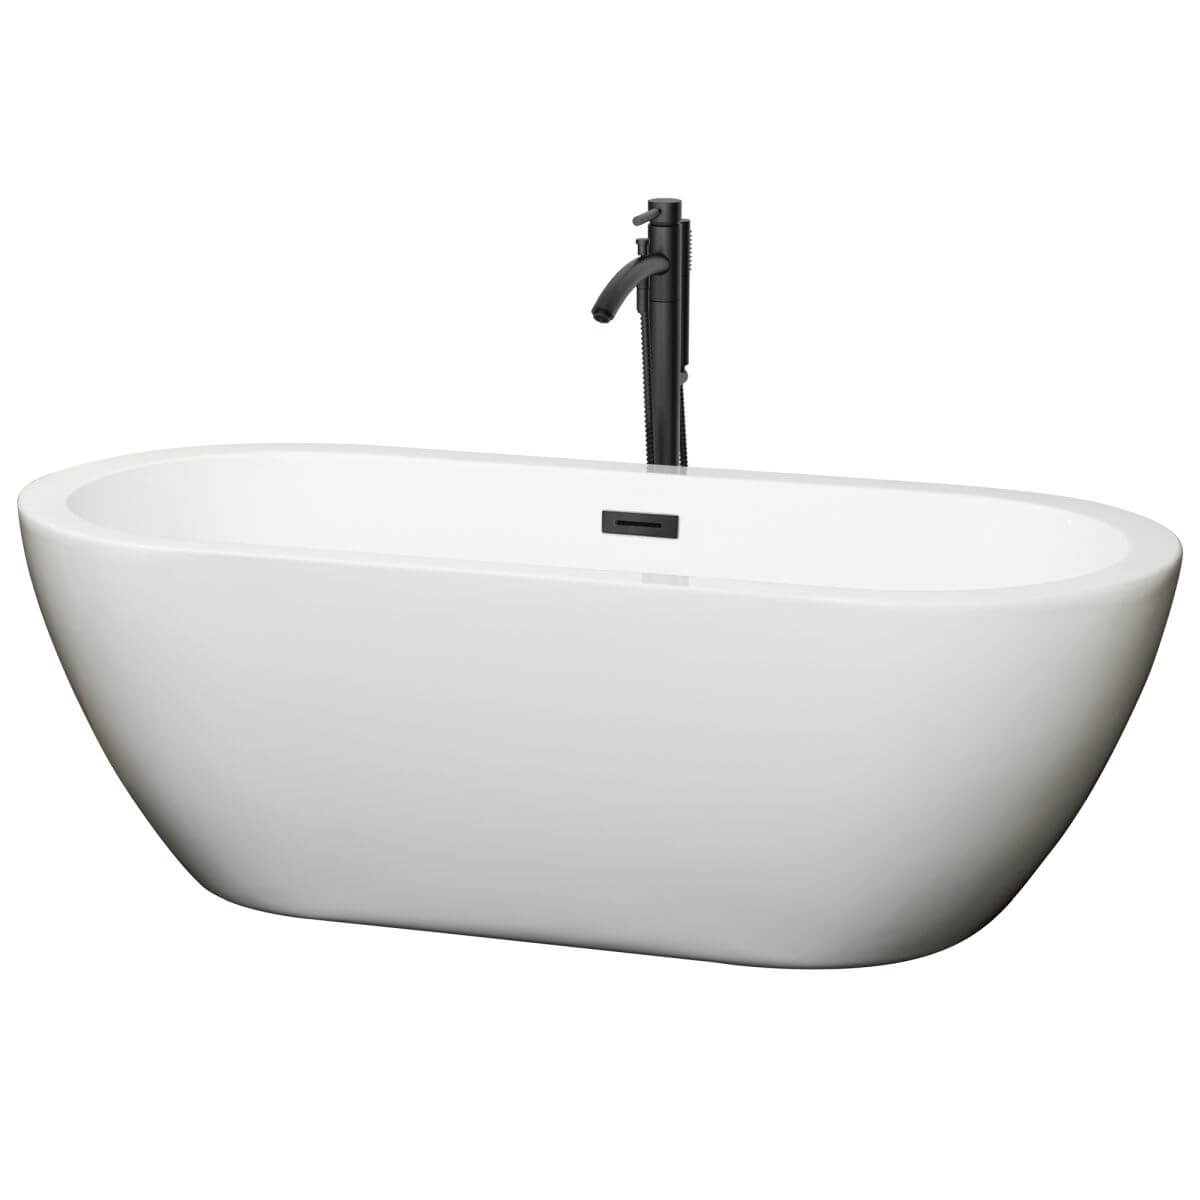 Wyndham Collection Soho 68 inch Freestanding Bathtub in White with Floor Mounted Faucet, Drain and Overflow Trim in Matte Black - WCOBT100268MBATPBK